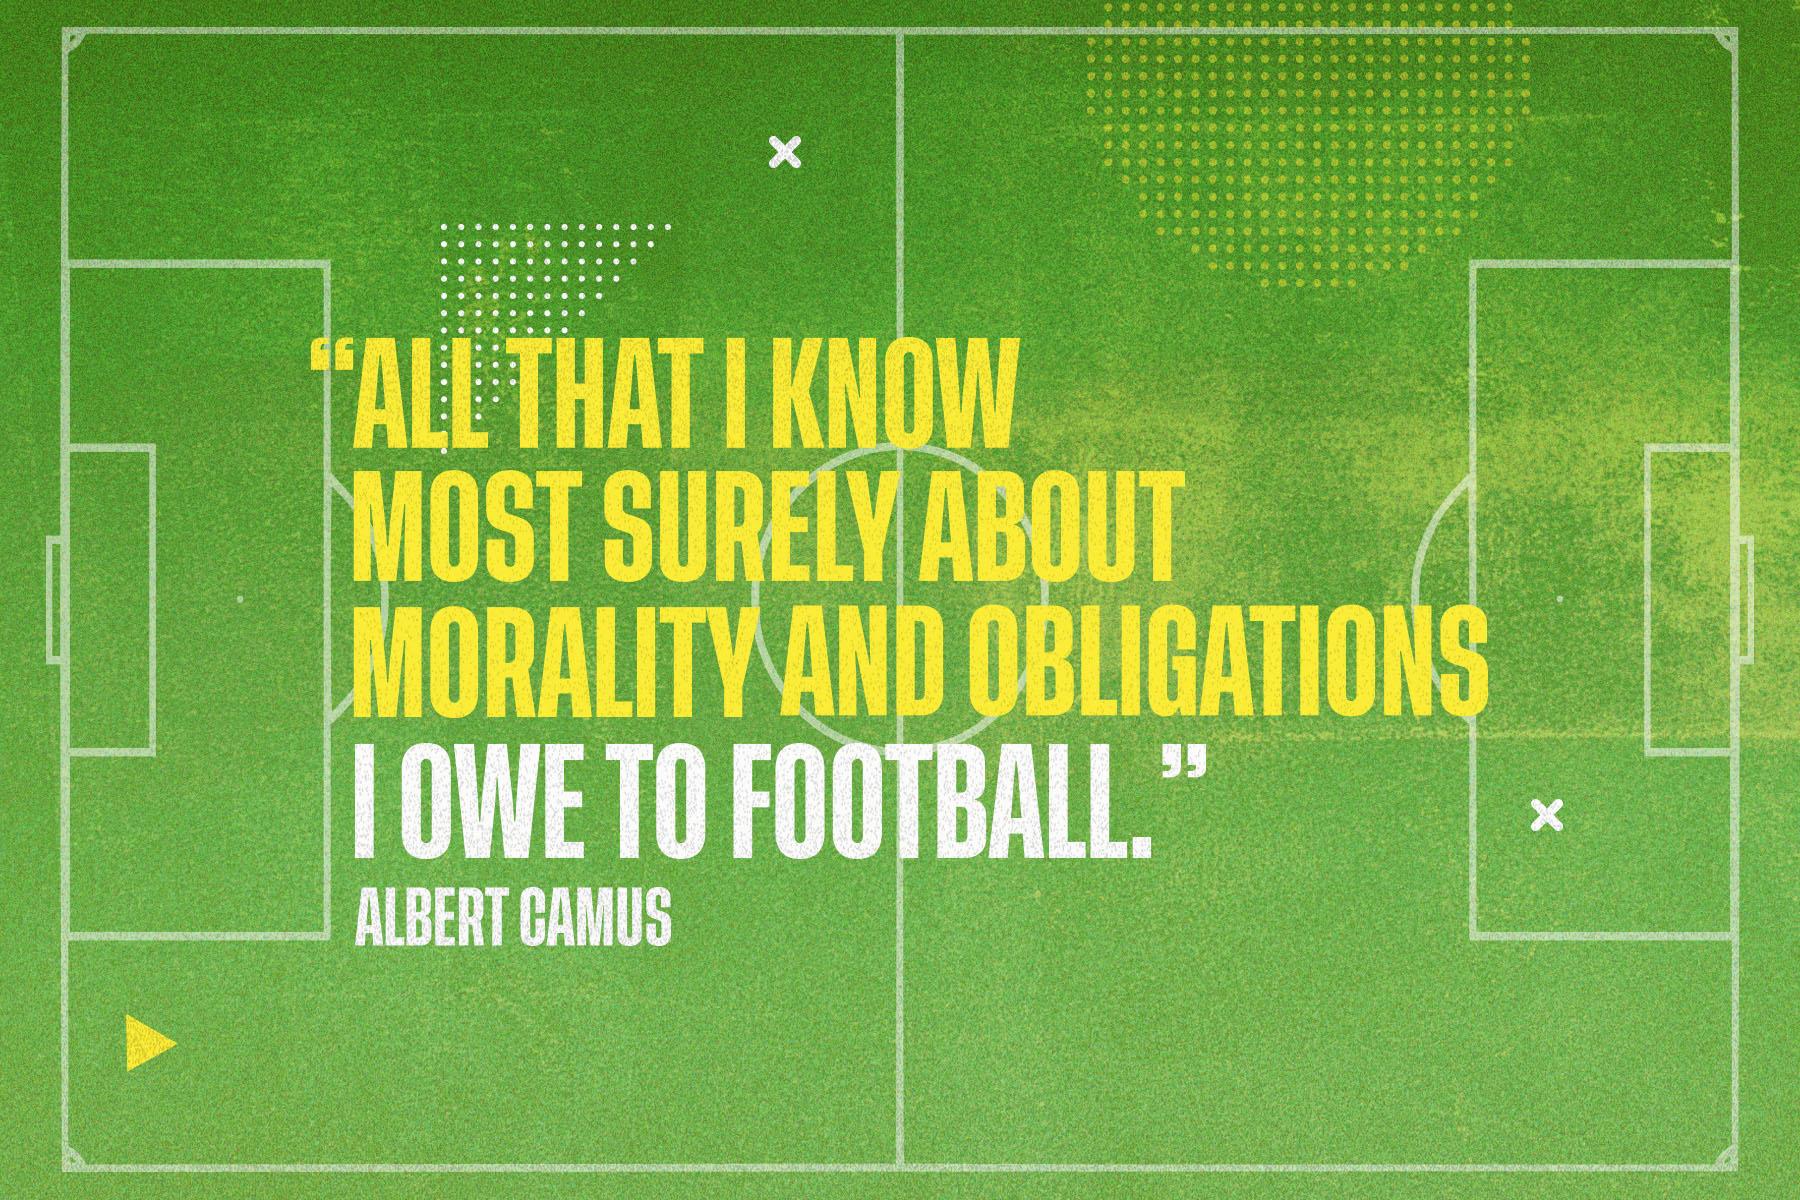 A quote from Albert Camus reading "All that I know most surely about morality and obligations I owe to football", in yellow and white letters against a green football pitch background.